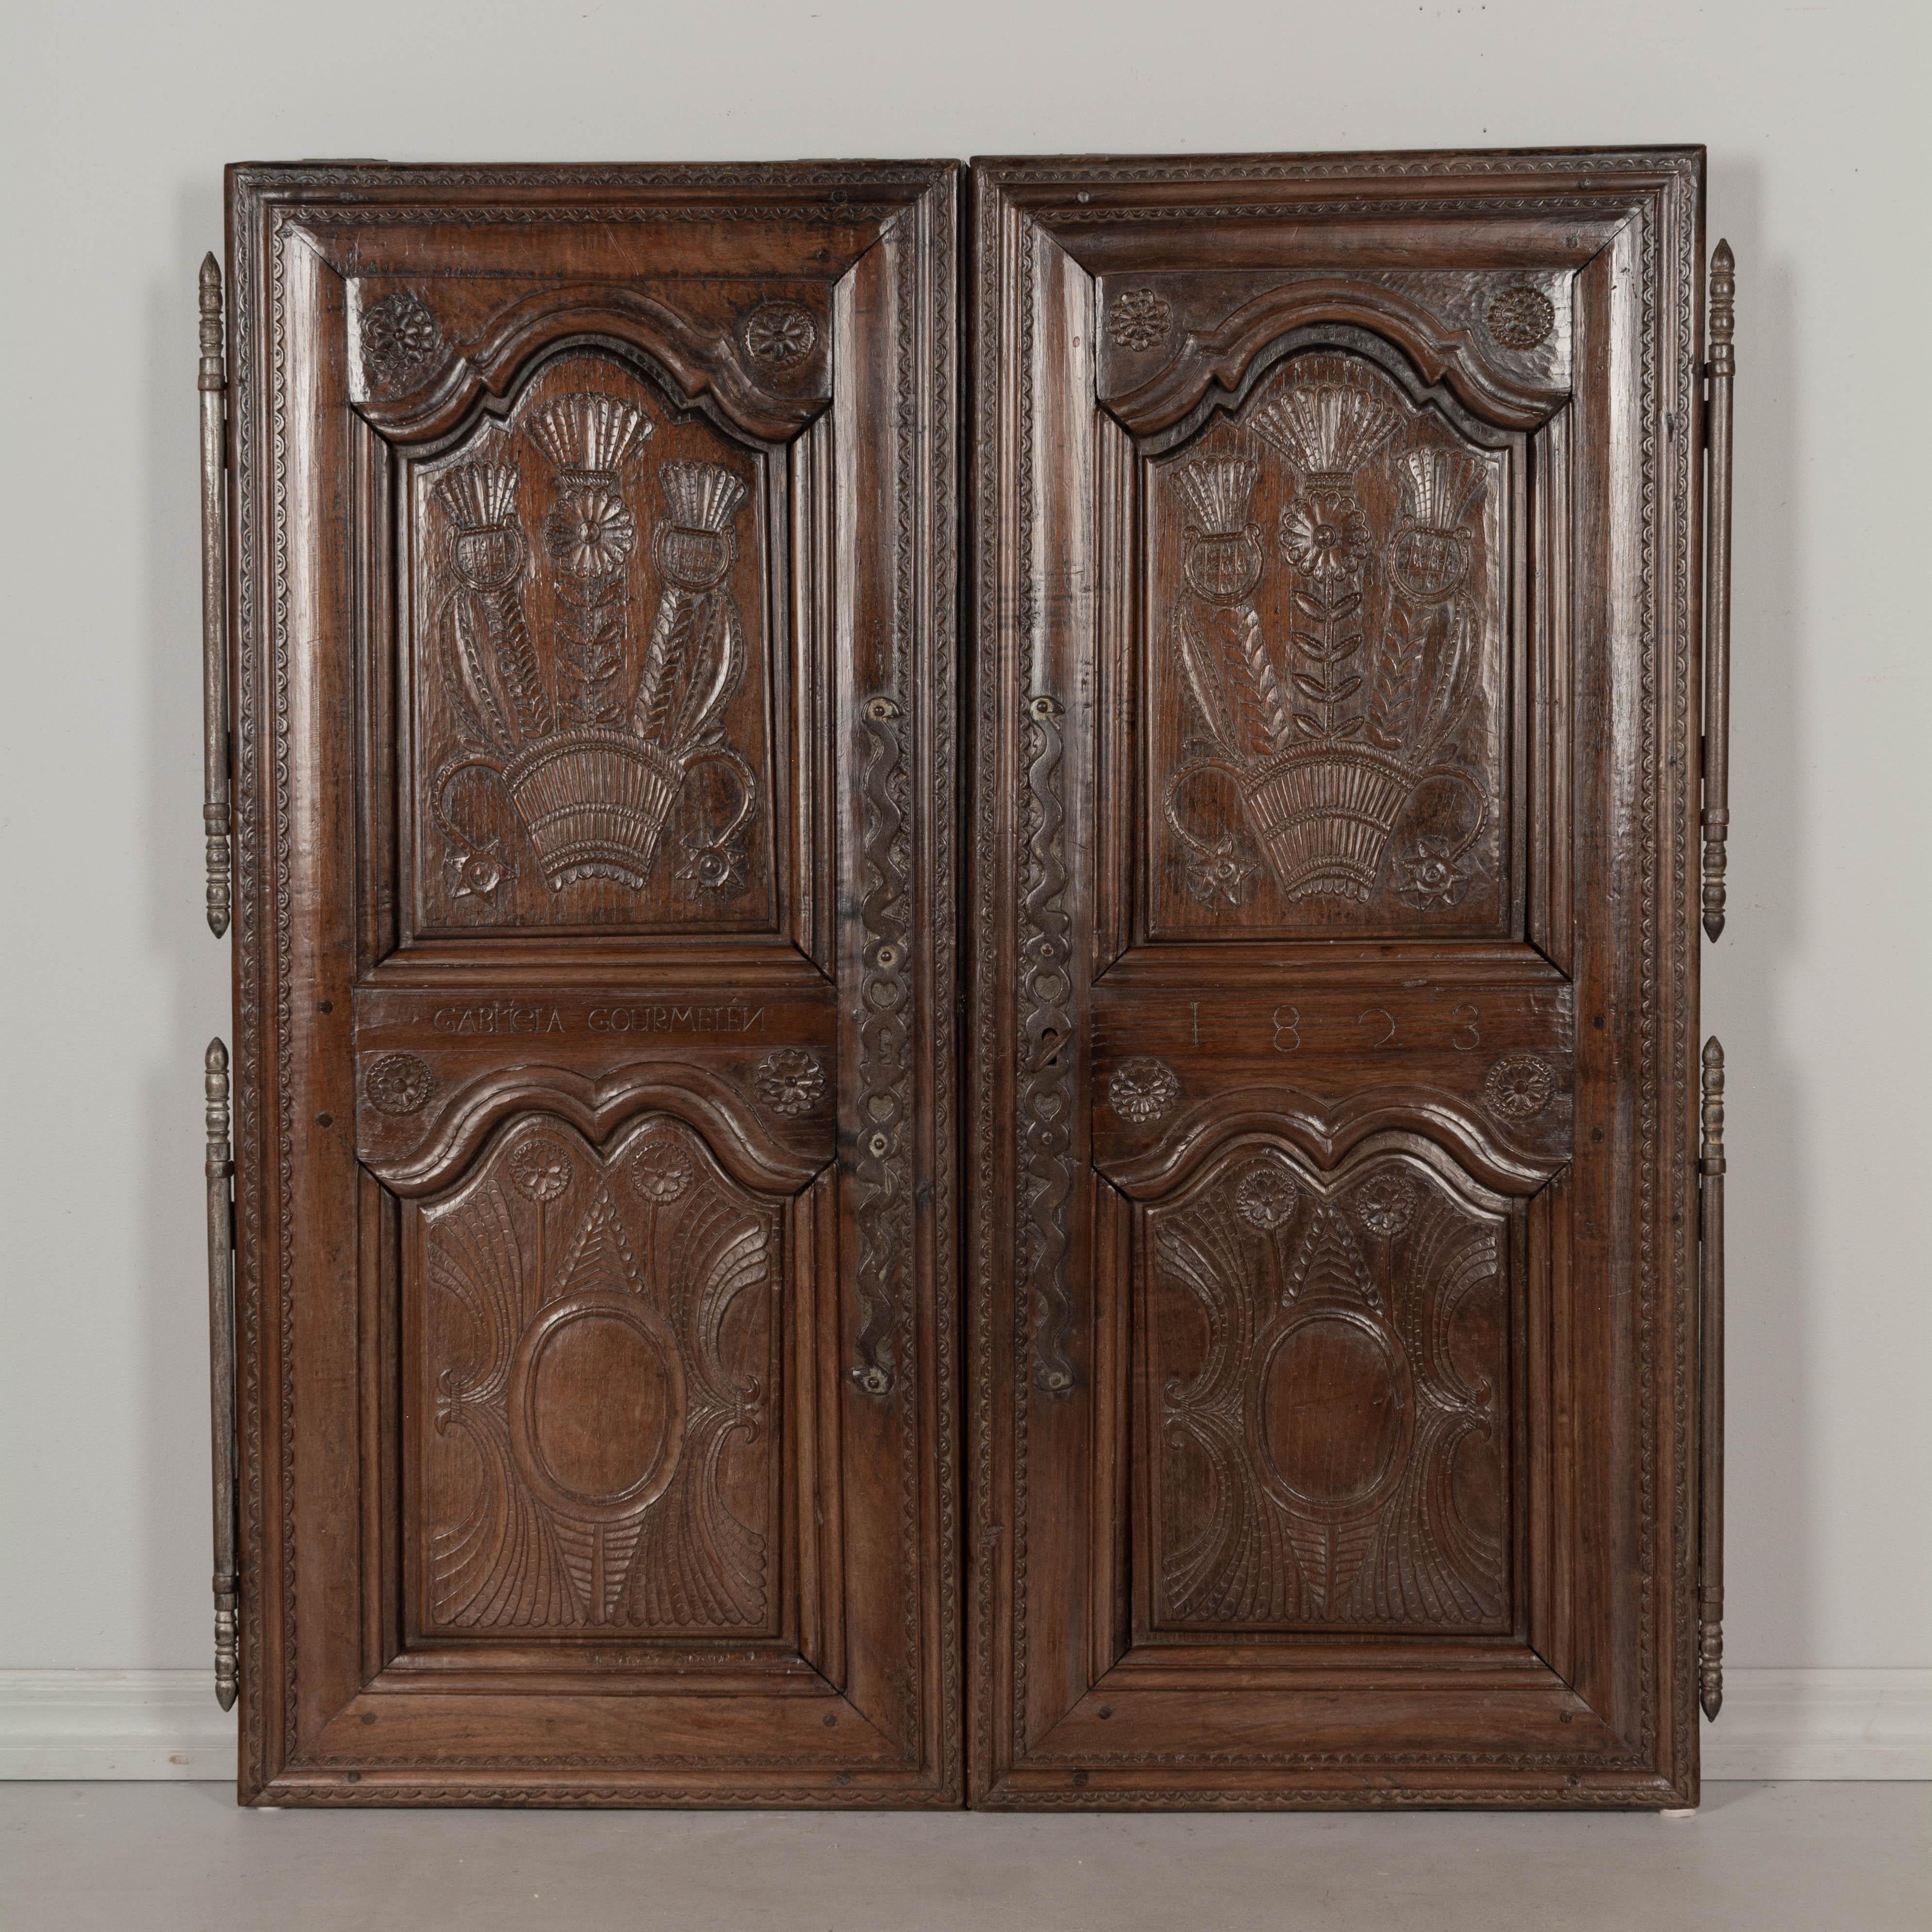 A set of early 19th century French doors from a cabinet or cupboard, crafted of solid chestnut. Thick panels with beautiful hand-carved stylized floral motif and waxed patina. Decorative cast iron escutcheons and large hinges. Working lock and key.